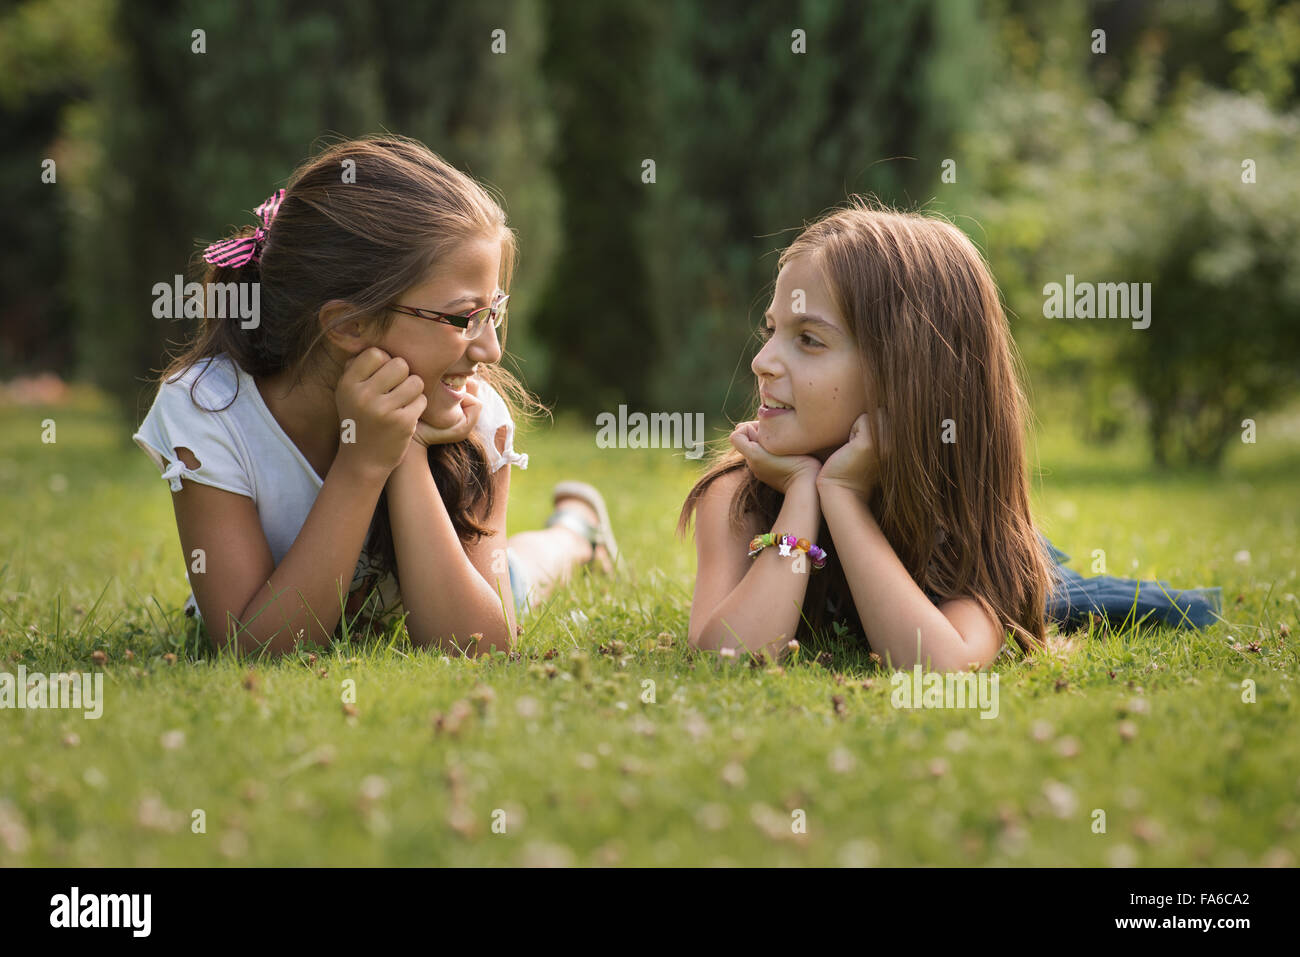 Two girls talking and smiling Stock Photo